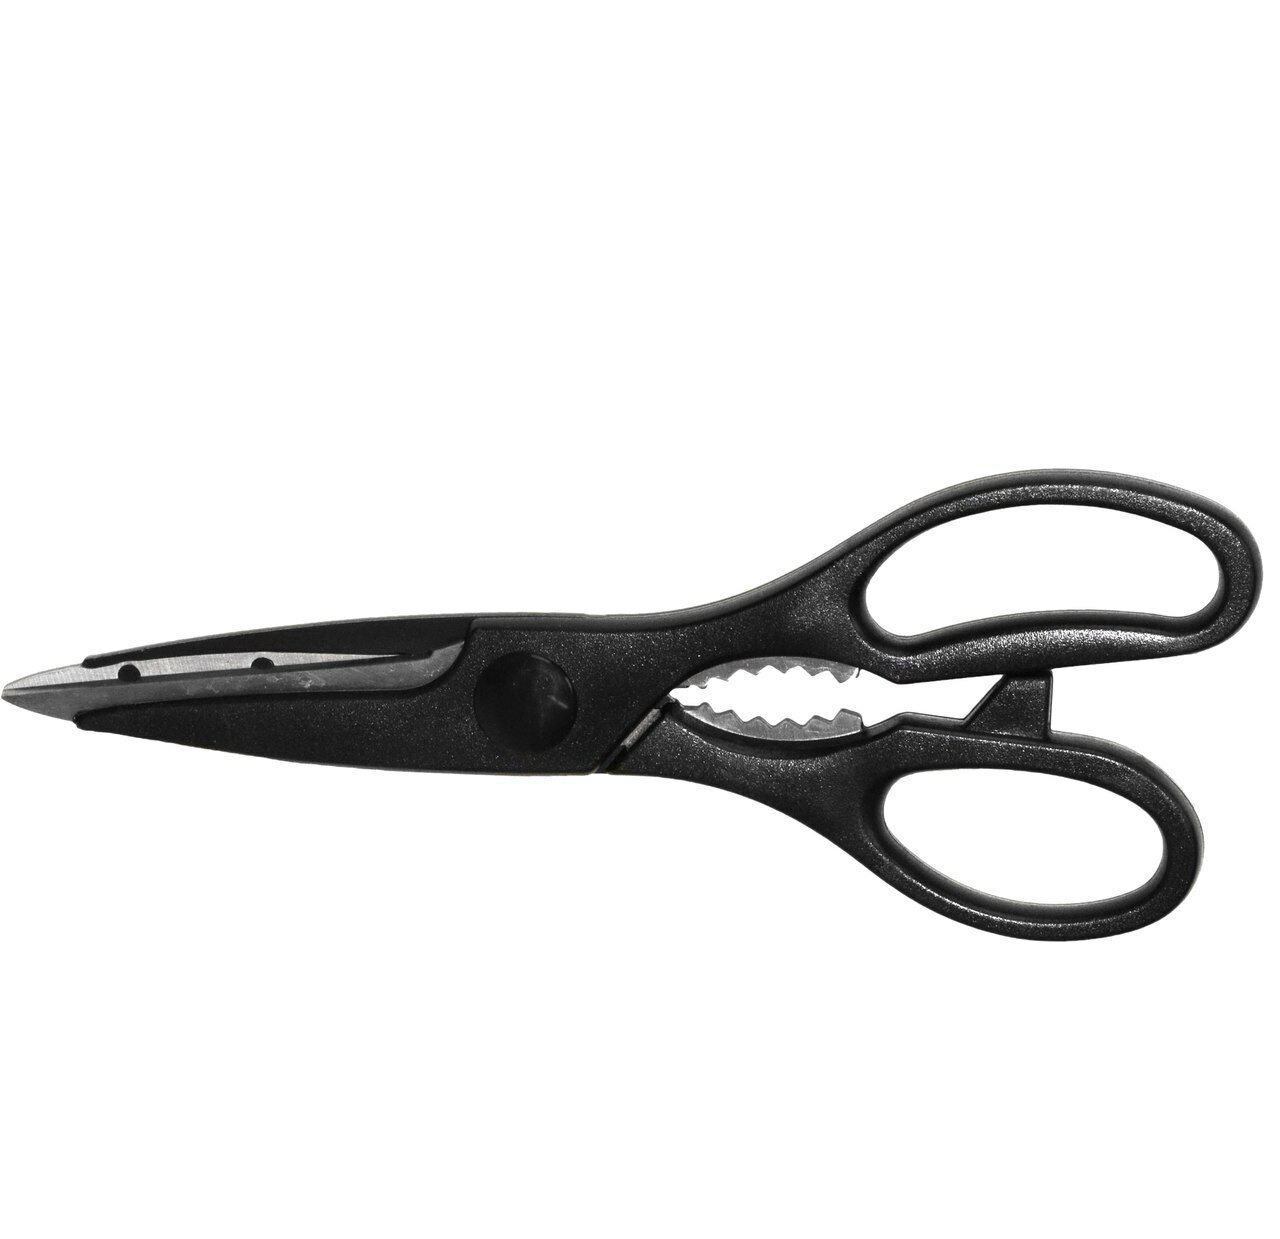 Chicago Cutlery Kitchen Scissors & Shears for sale